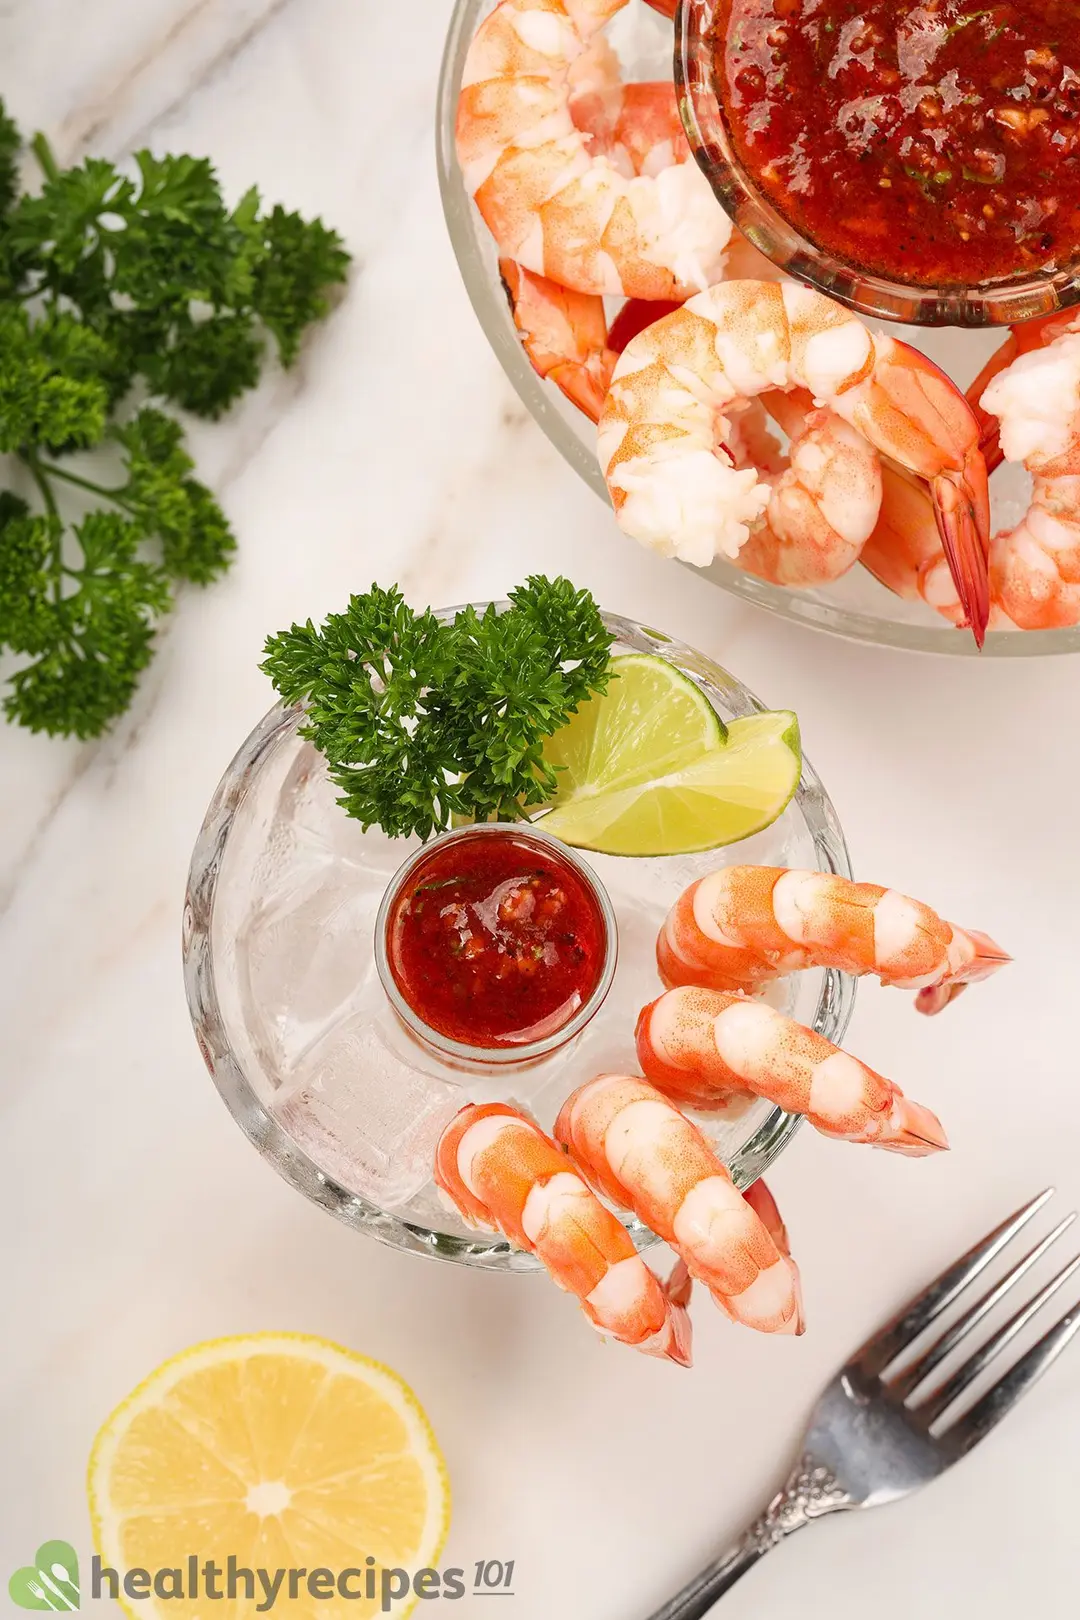 What to Serve With Shrimp Cocktail